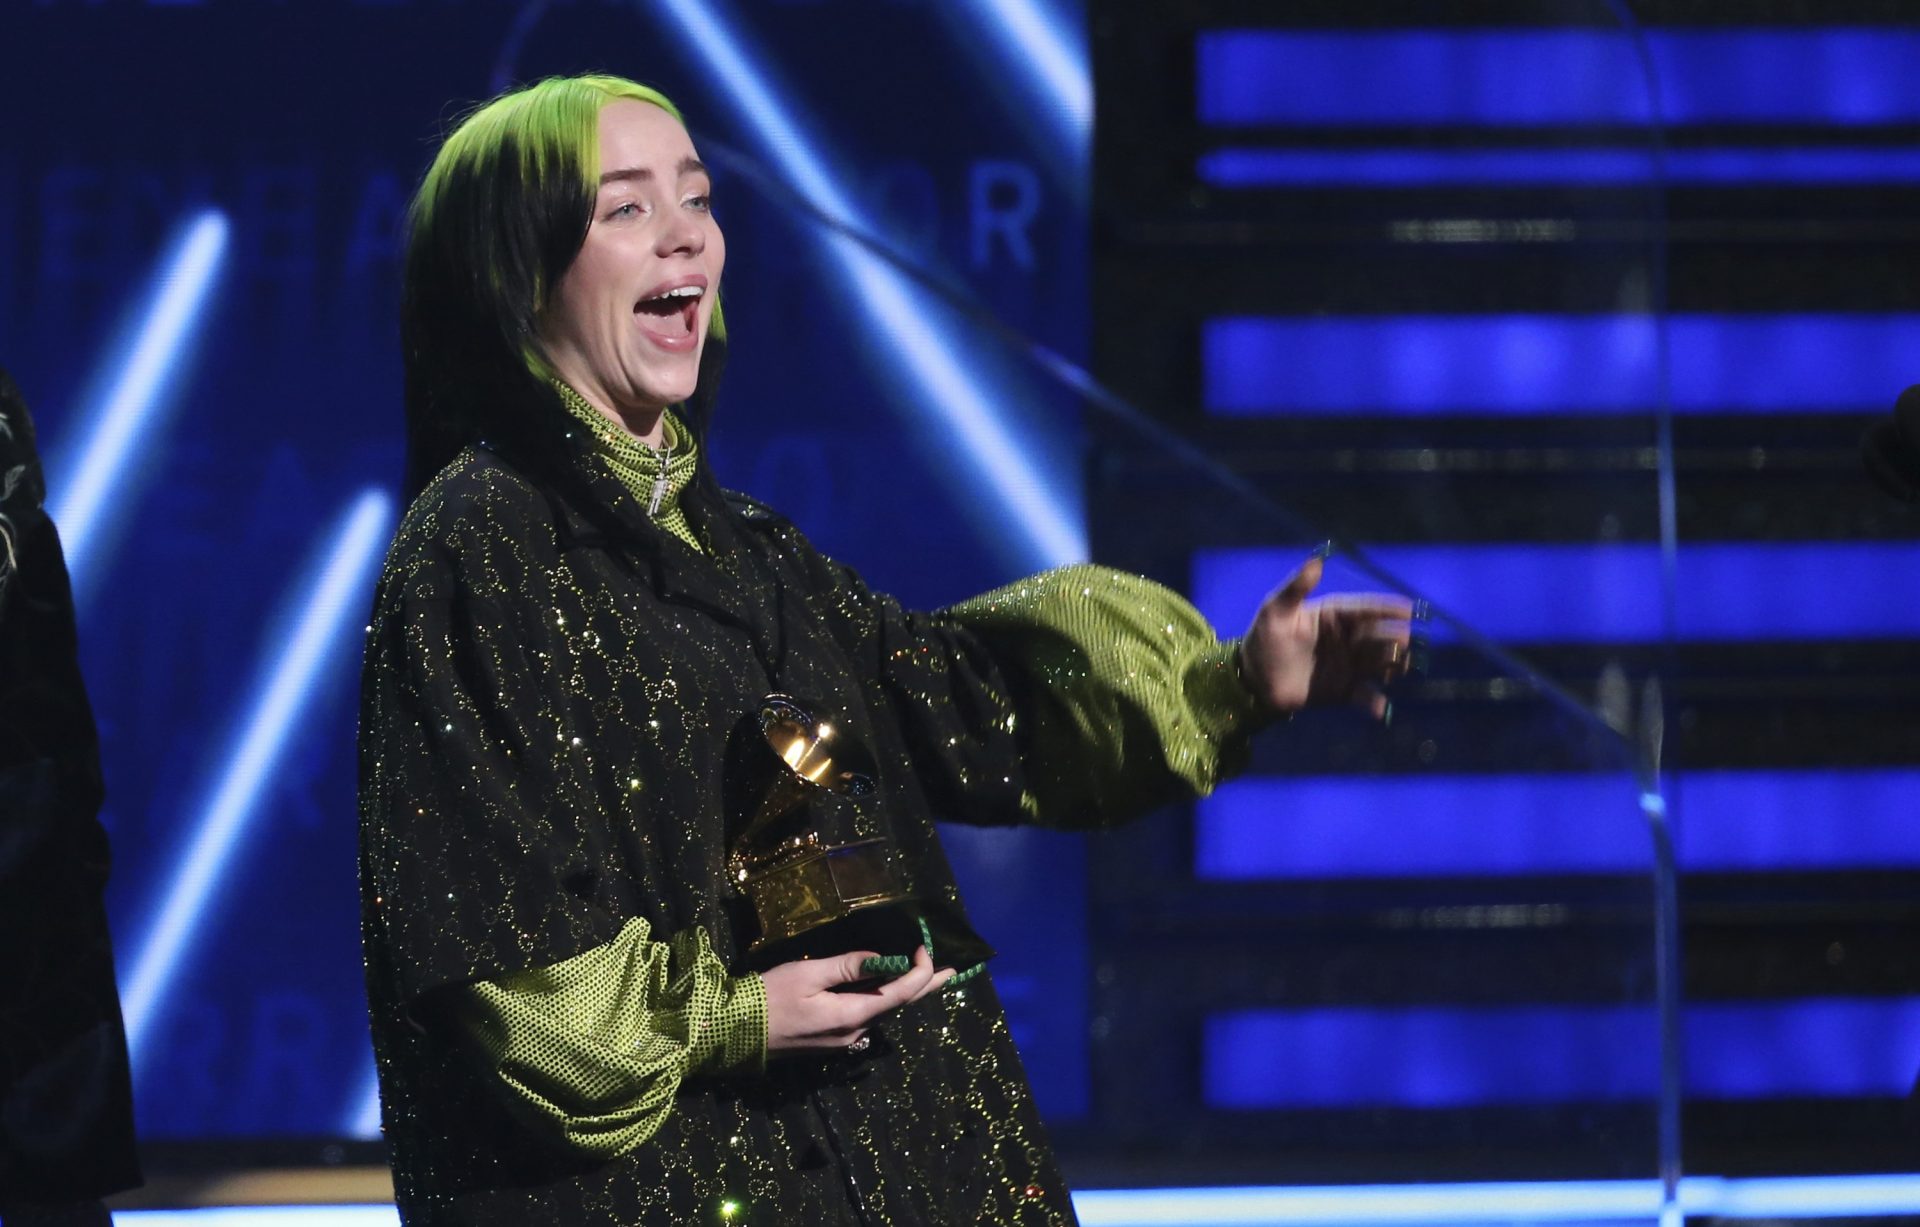 Billie Eilish Sweeps Grammys In Ceremony Clouded By Controversy